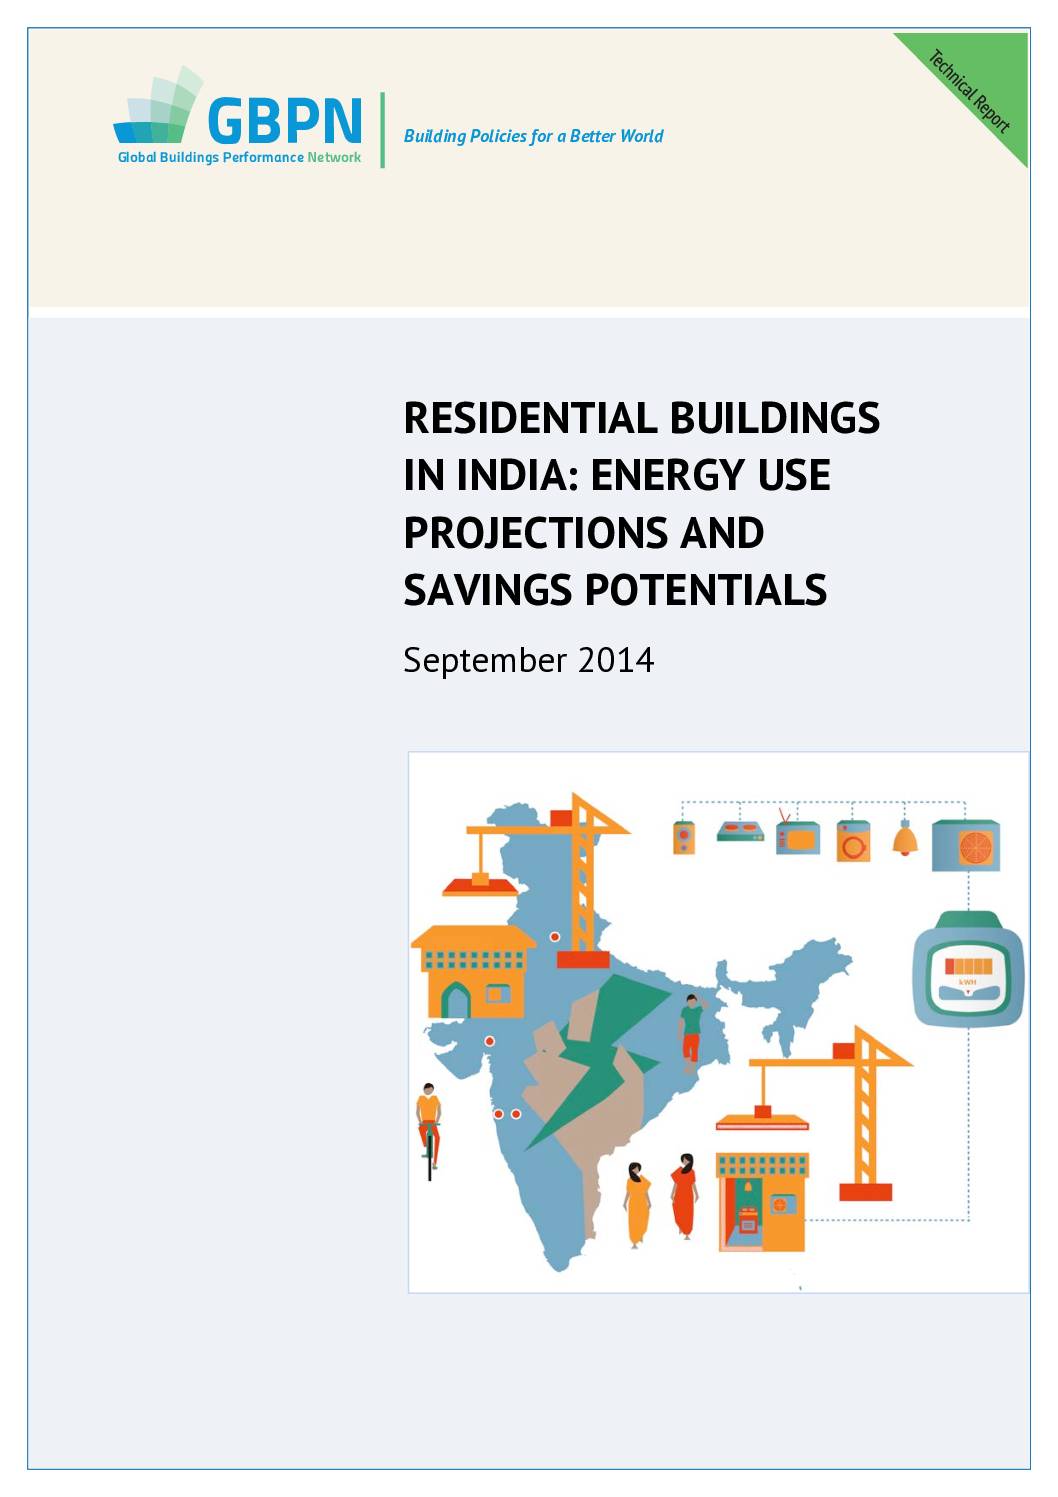 Residential Buildings in India: Energy Use Projections and Savings Potentials